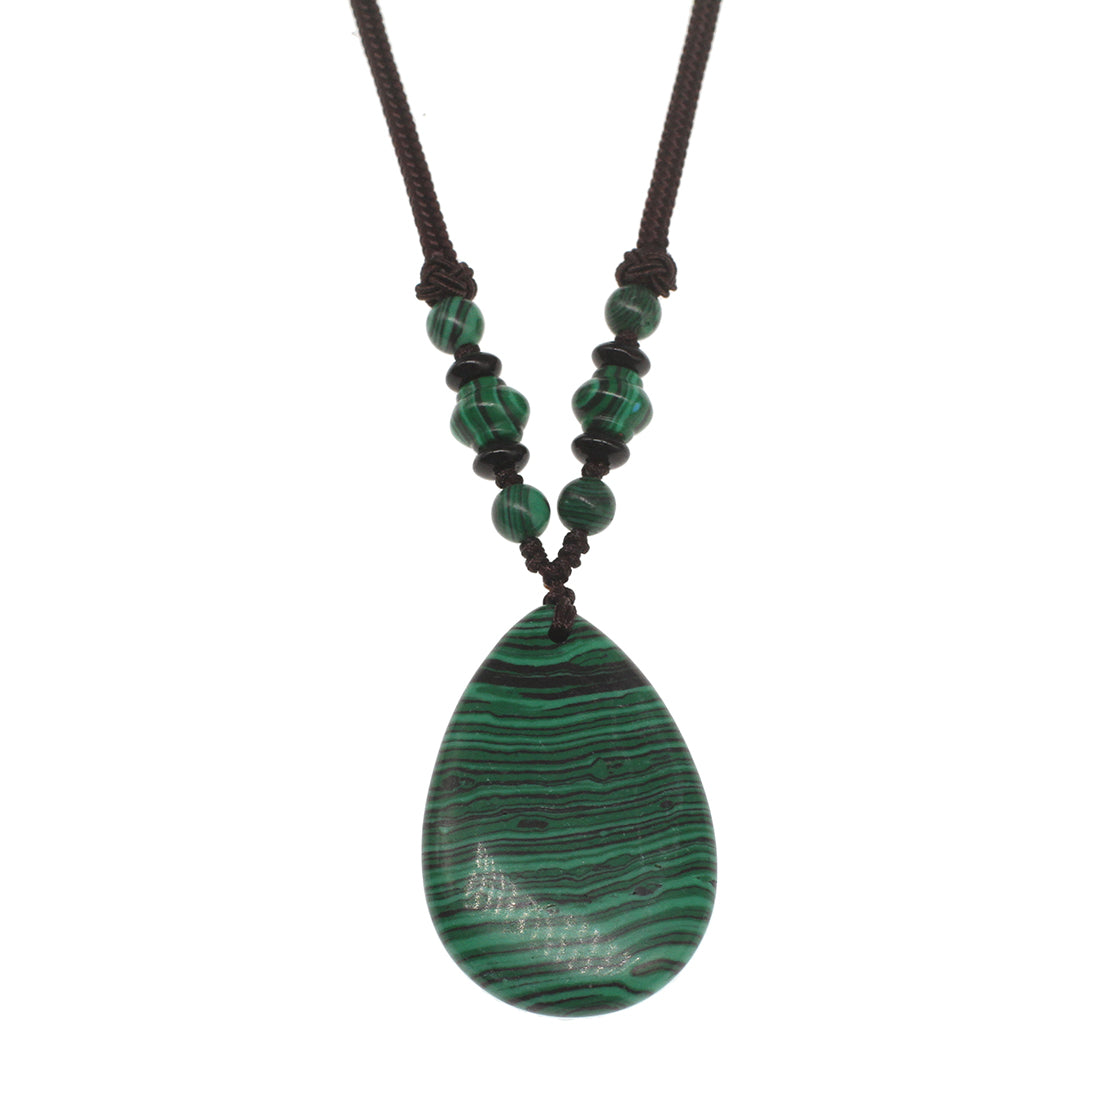 Pear Malachite Gemstone Pendant with Necklace - 42x27mm - Length 12 inch - 26g - NEW1021